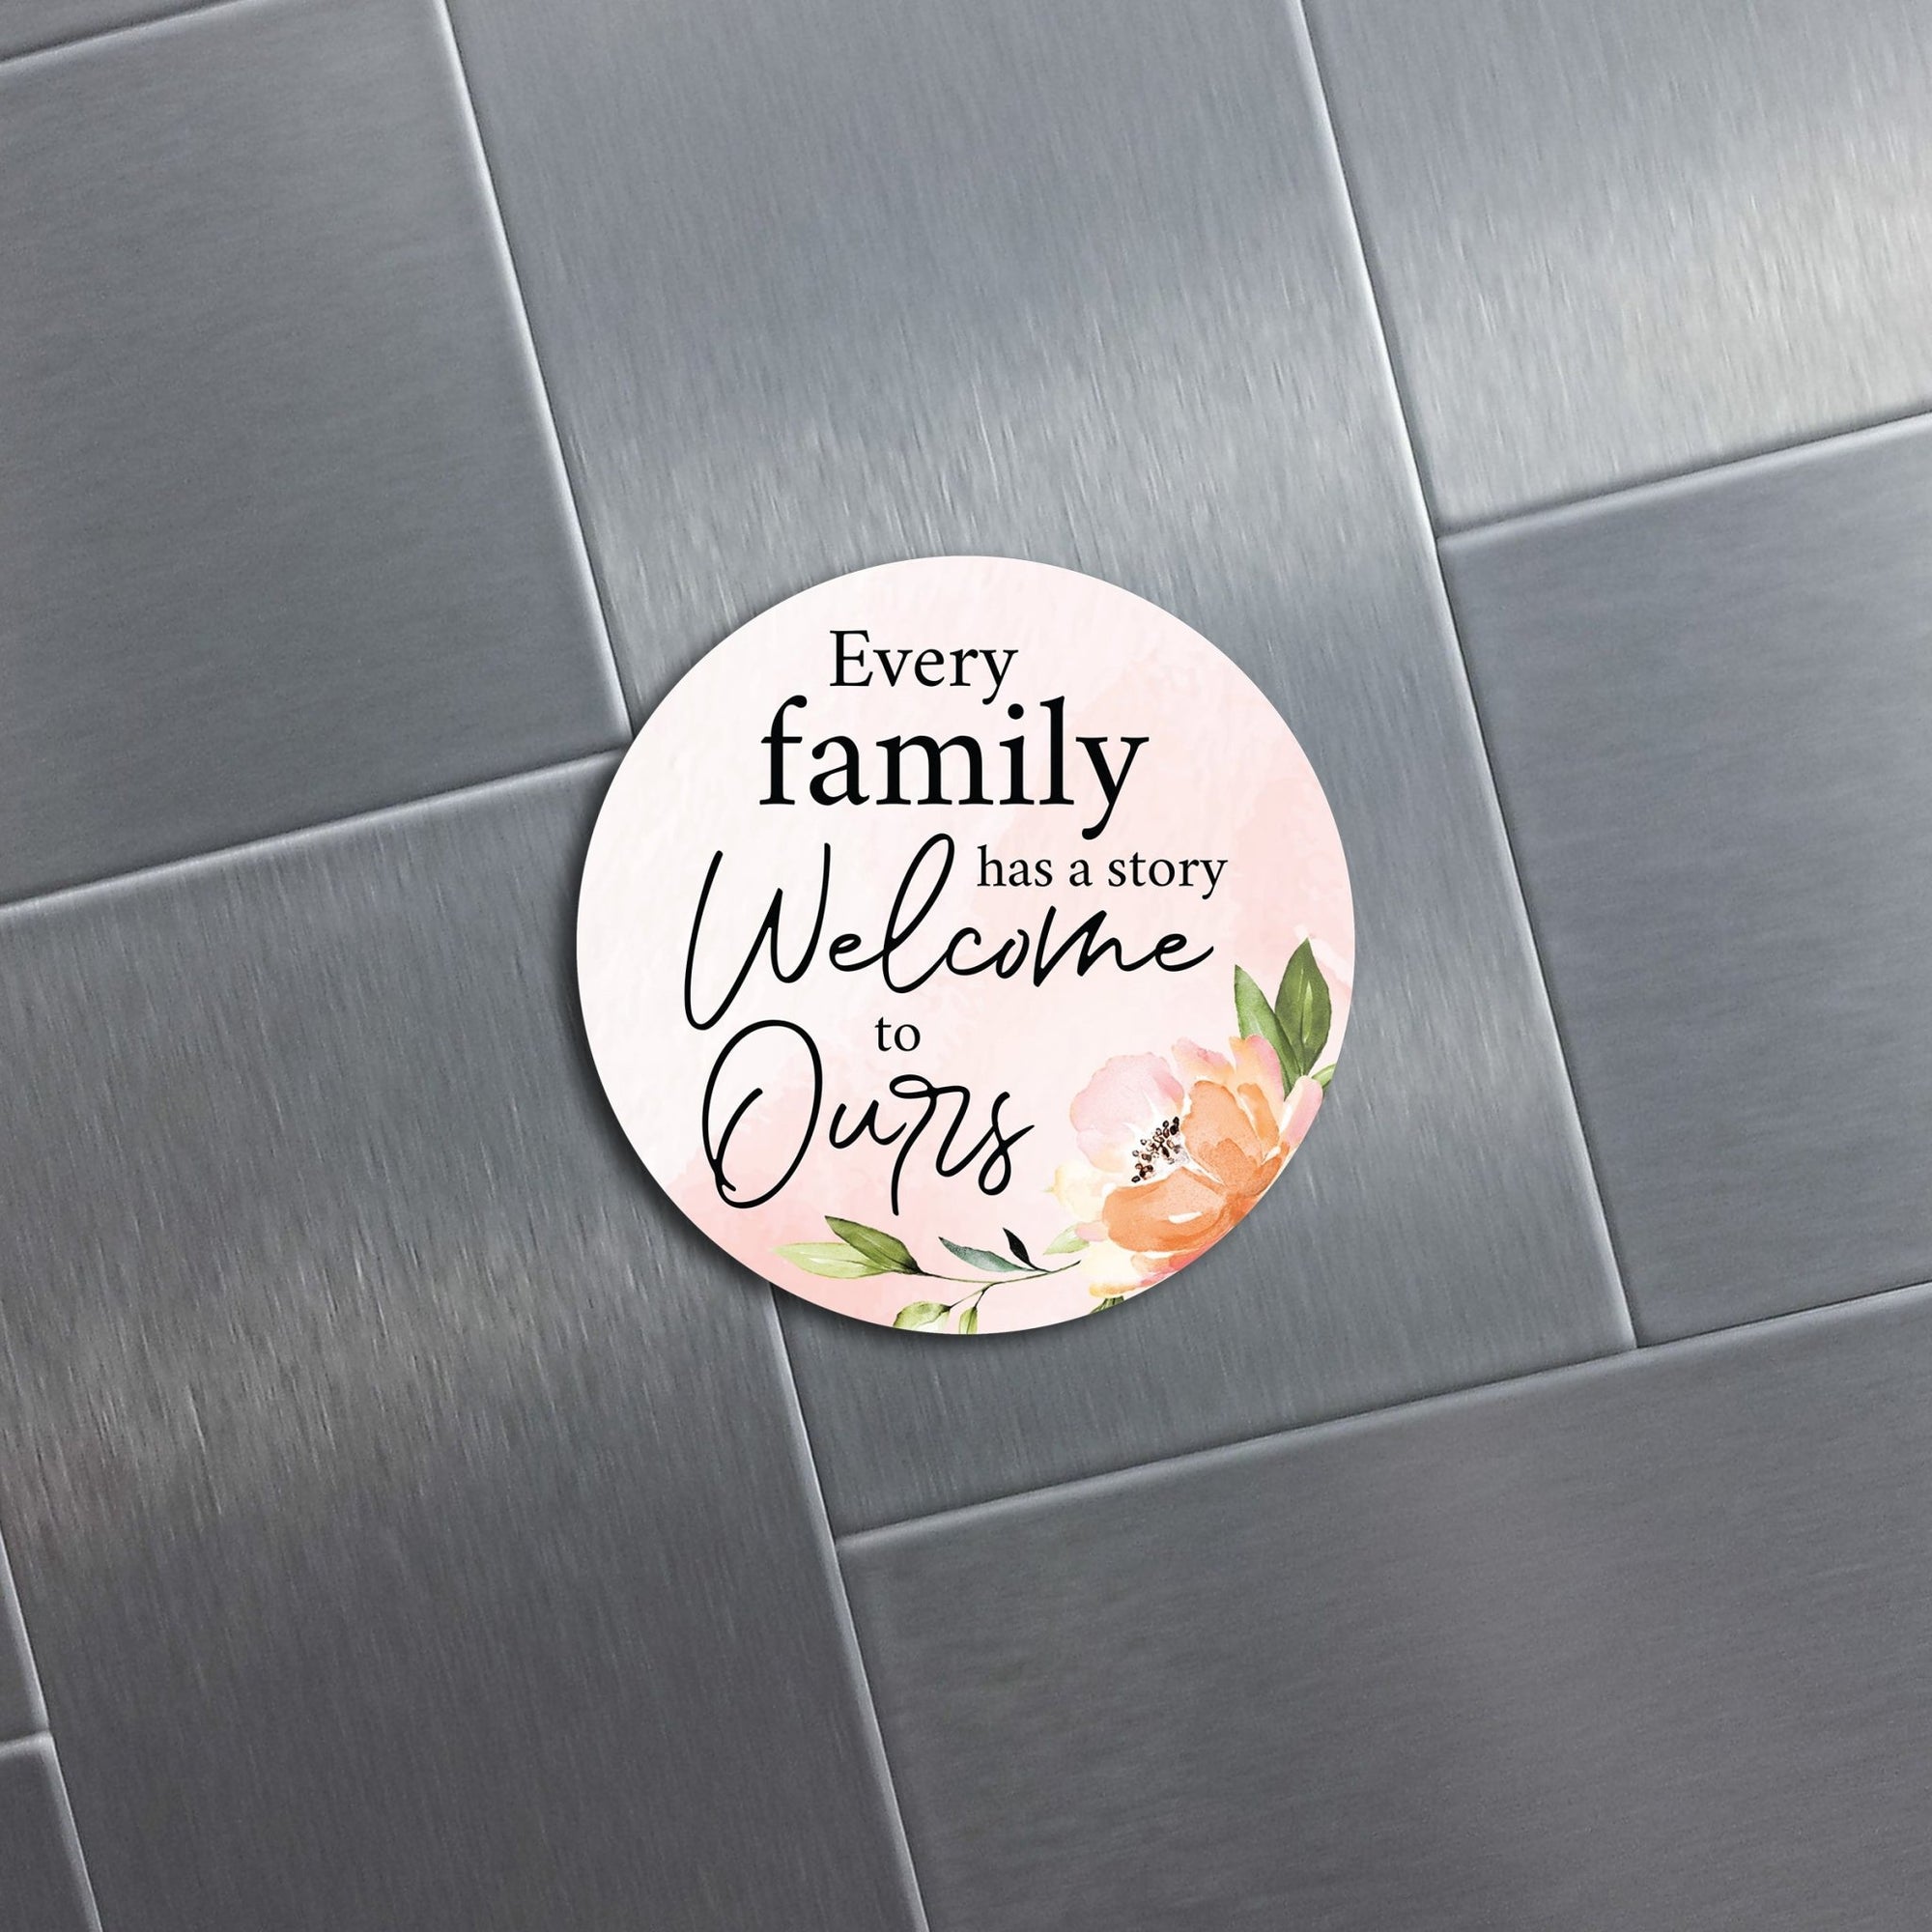 Family & Home Round Refrigerator Magnet Perfect Gift Idea For Home Décor - Every Family - LifeSong Milestones